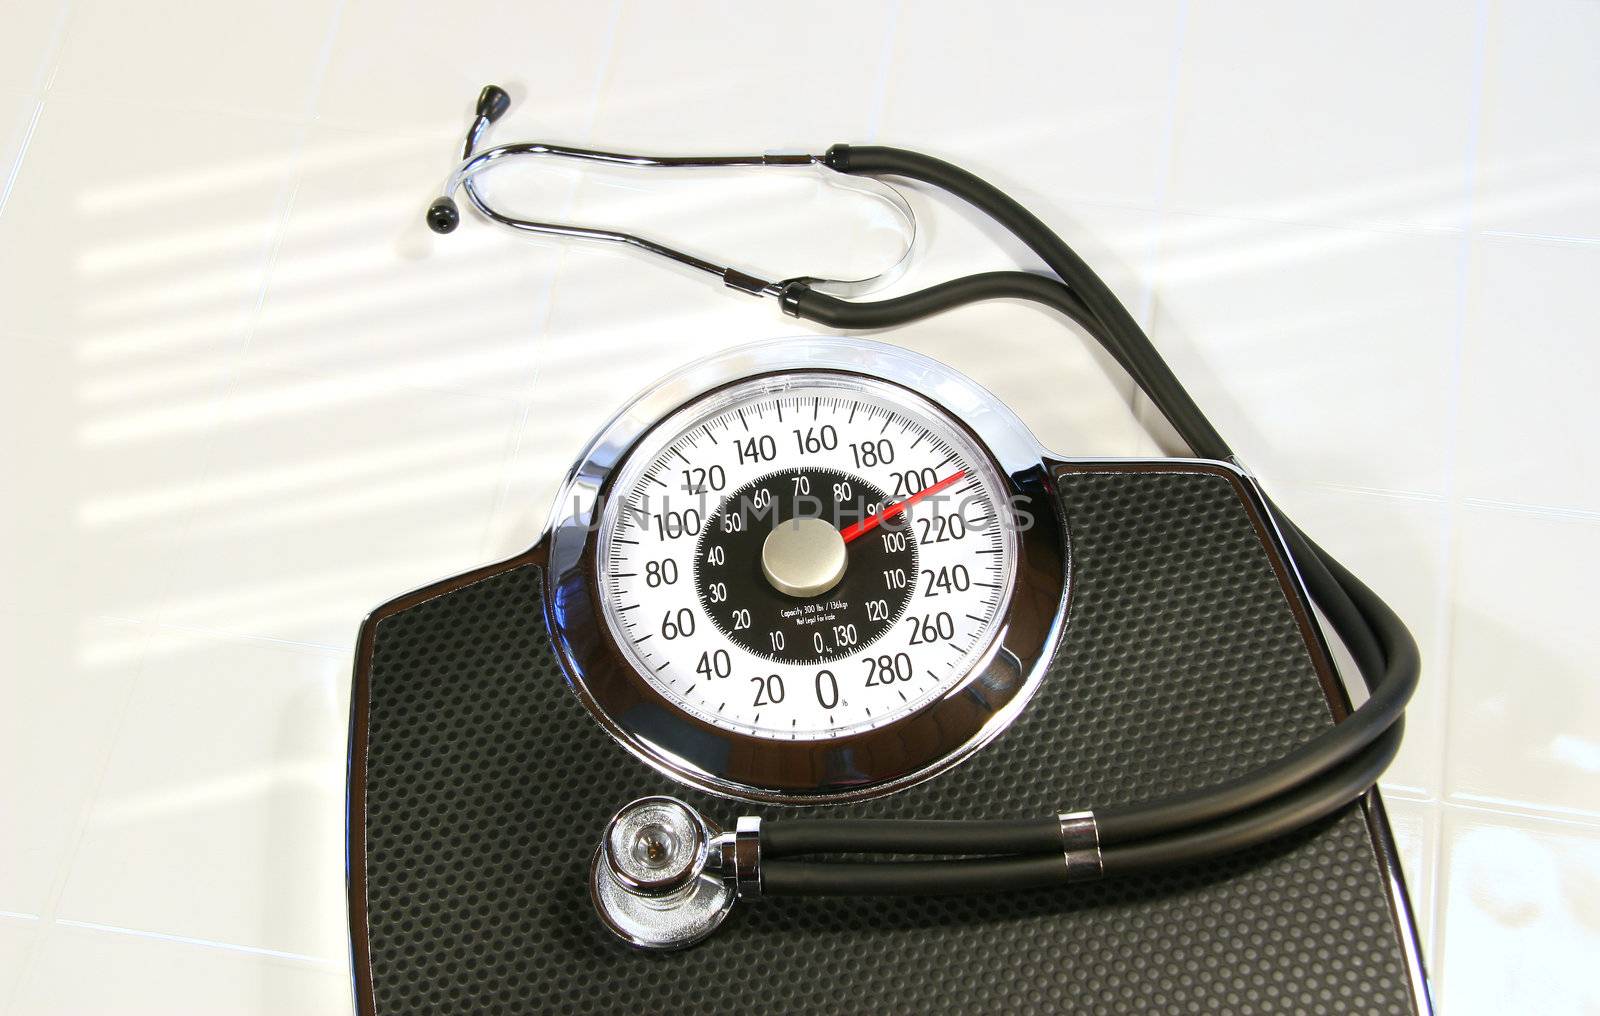 Weight scale with sthetescope on white tile